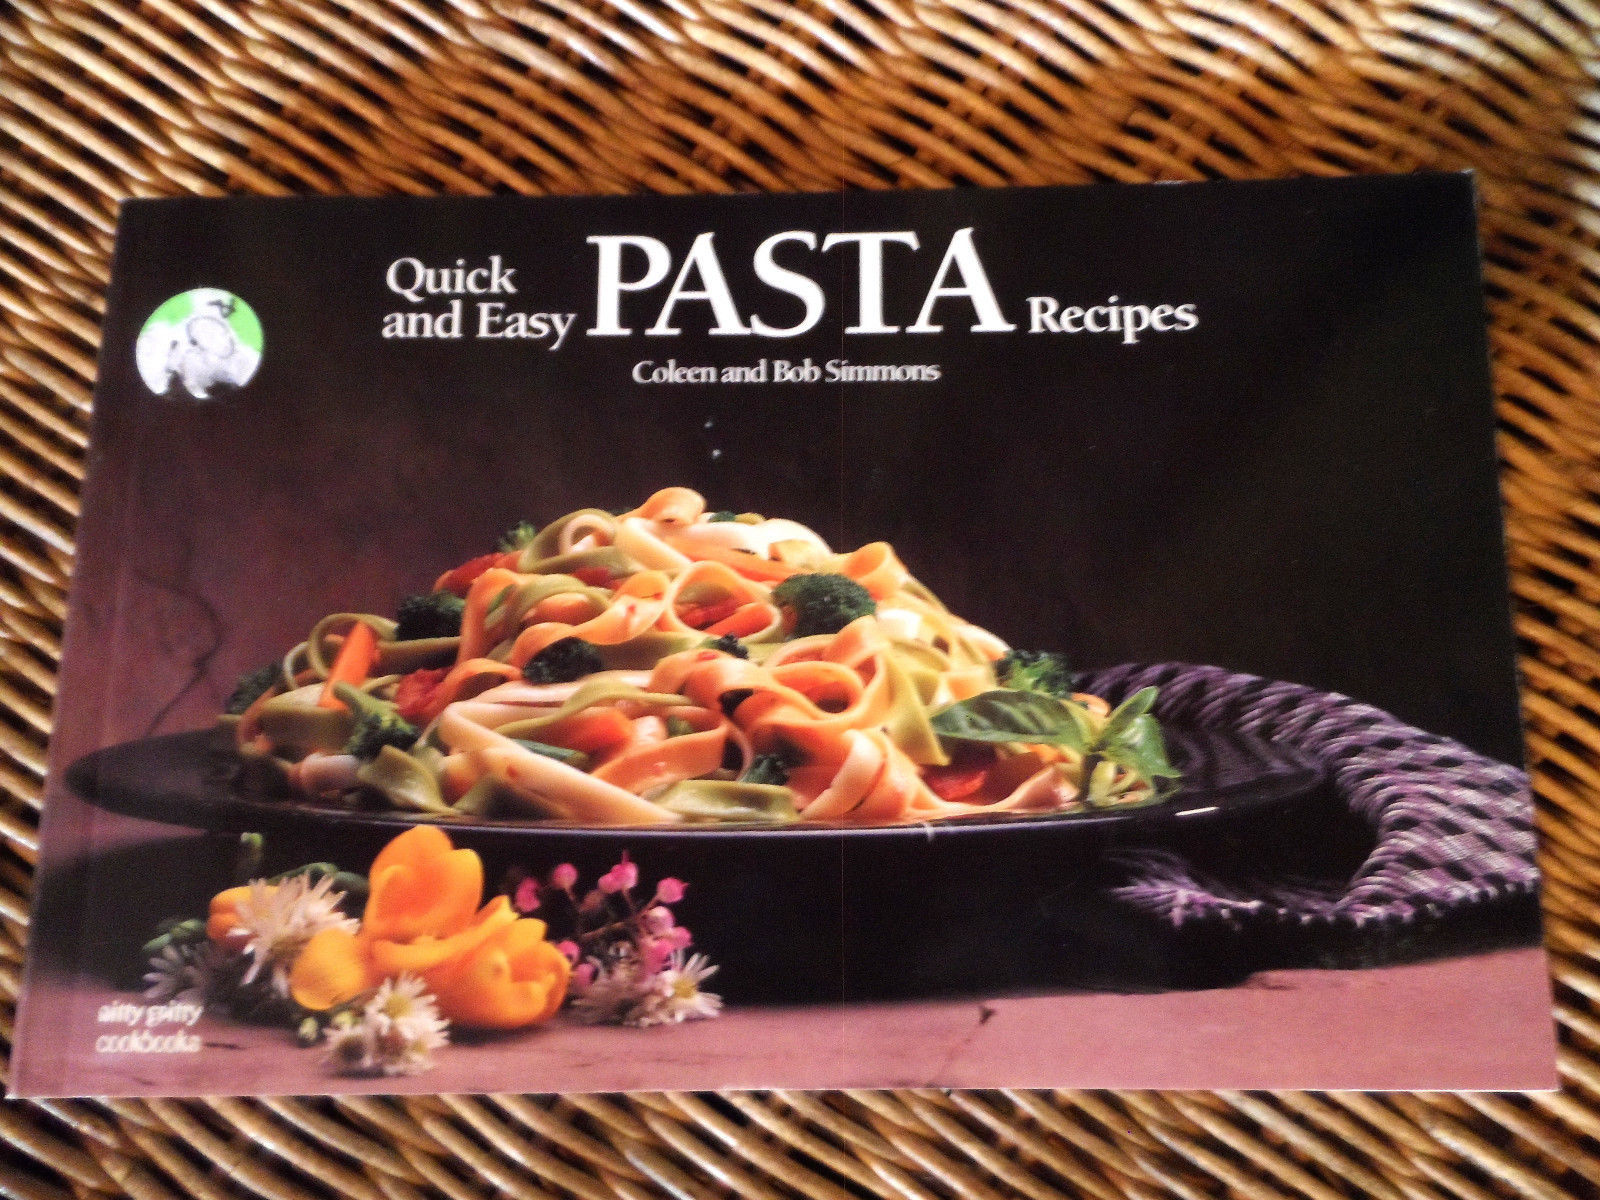 NITTY GRITTY COOKBOOKS Pasta Recipes Quick & Easy Dinners 1558670505 172 Pages - $2.96